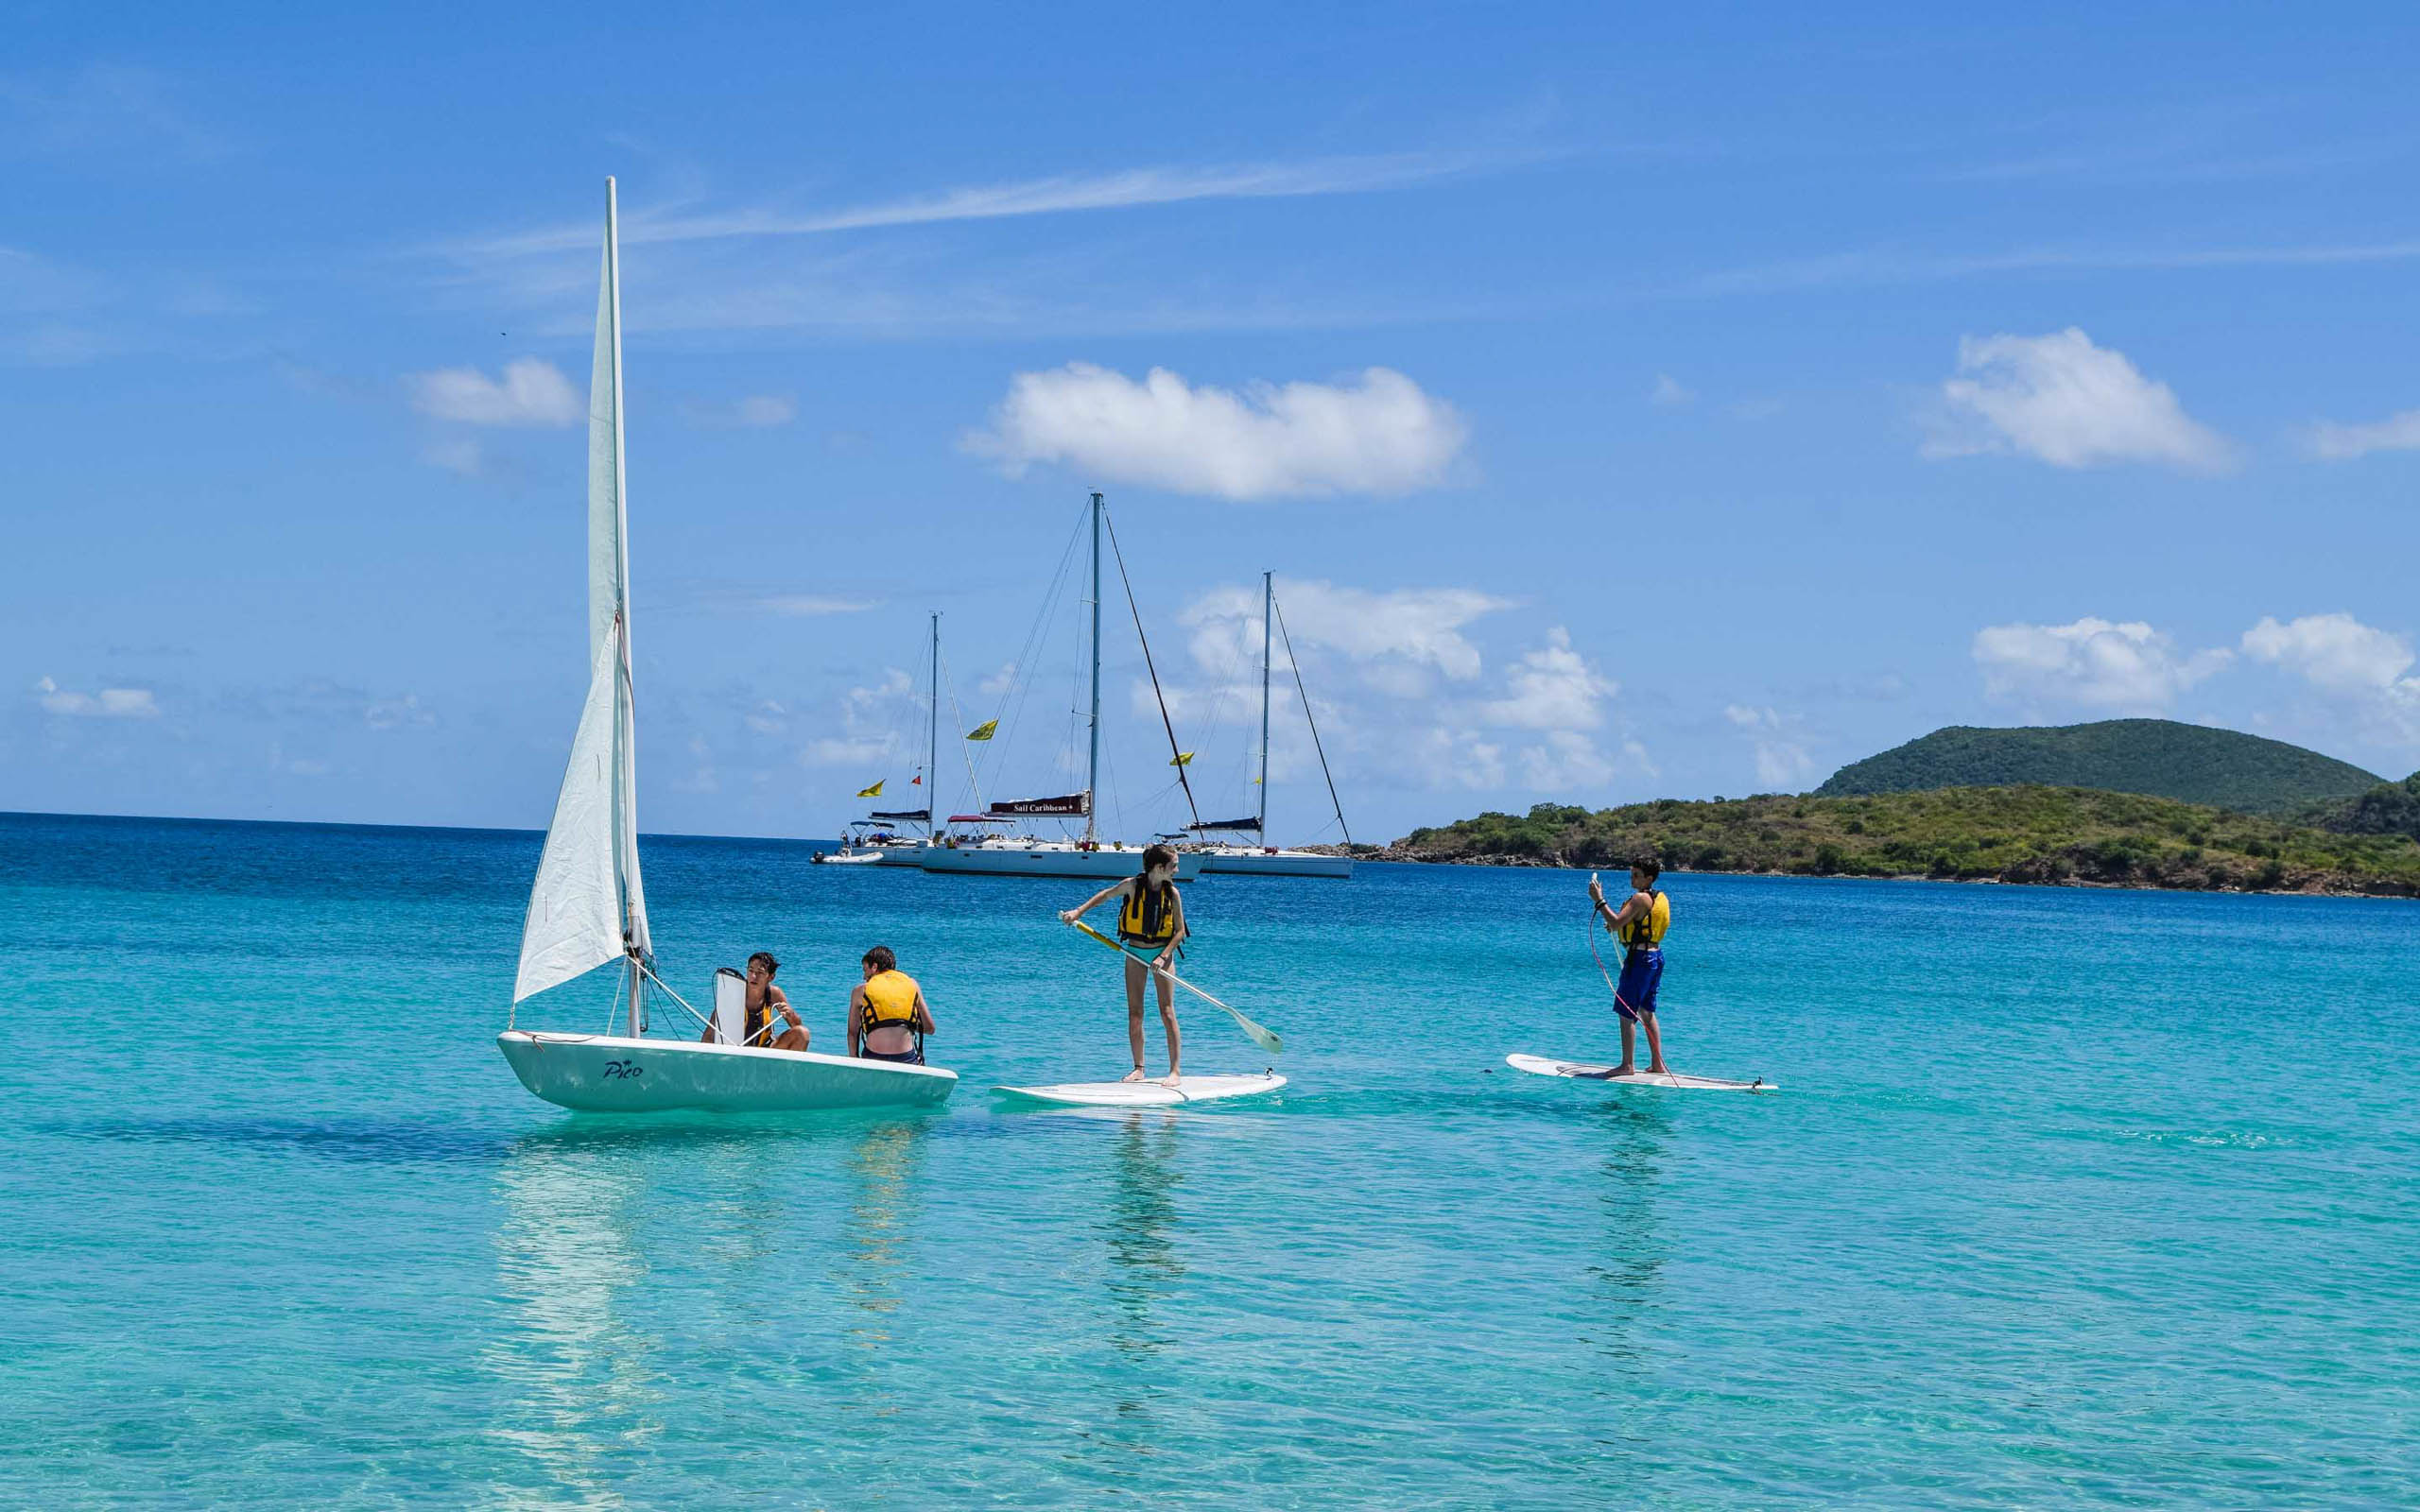 A group of people on sailboats in the water.